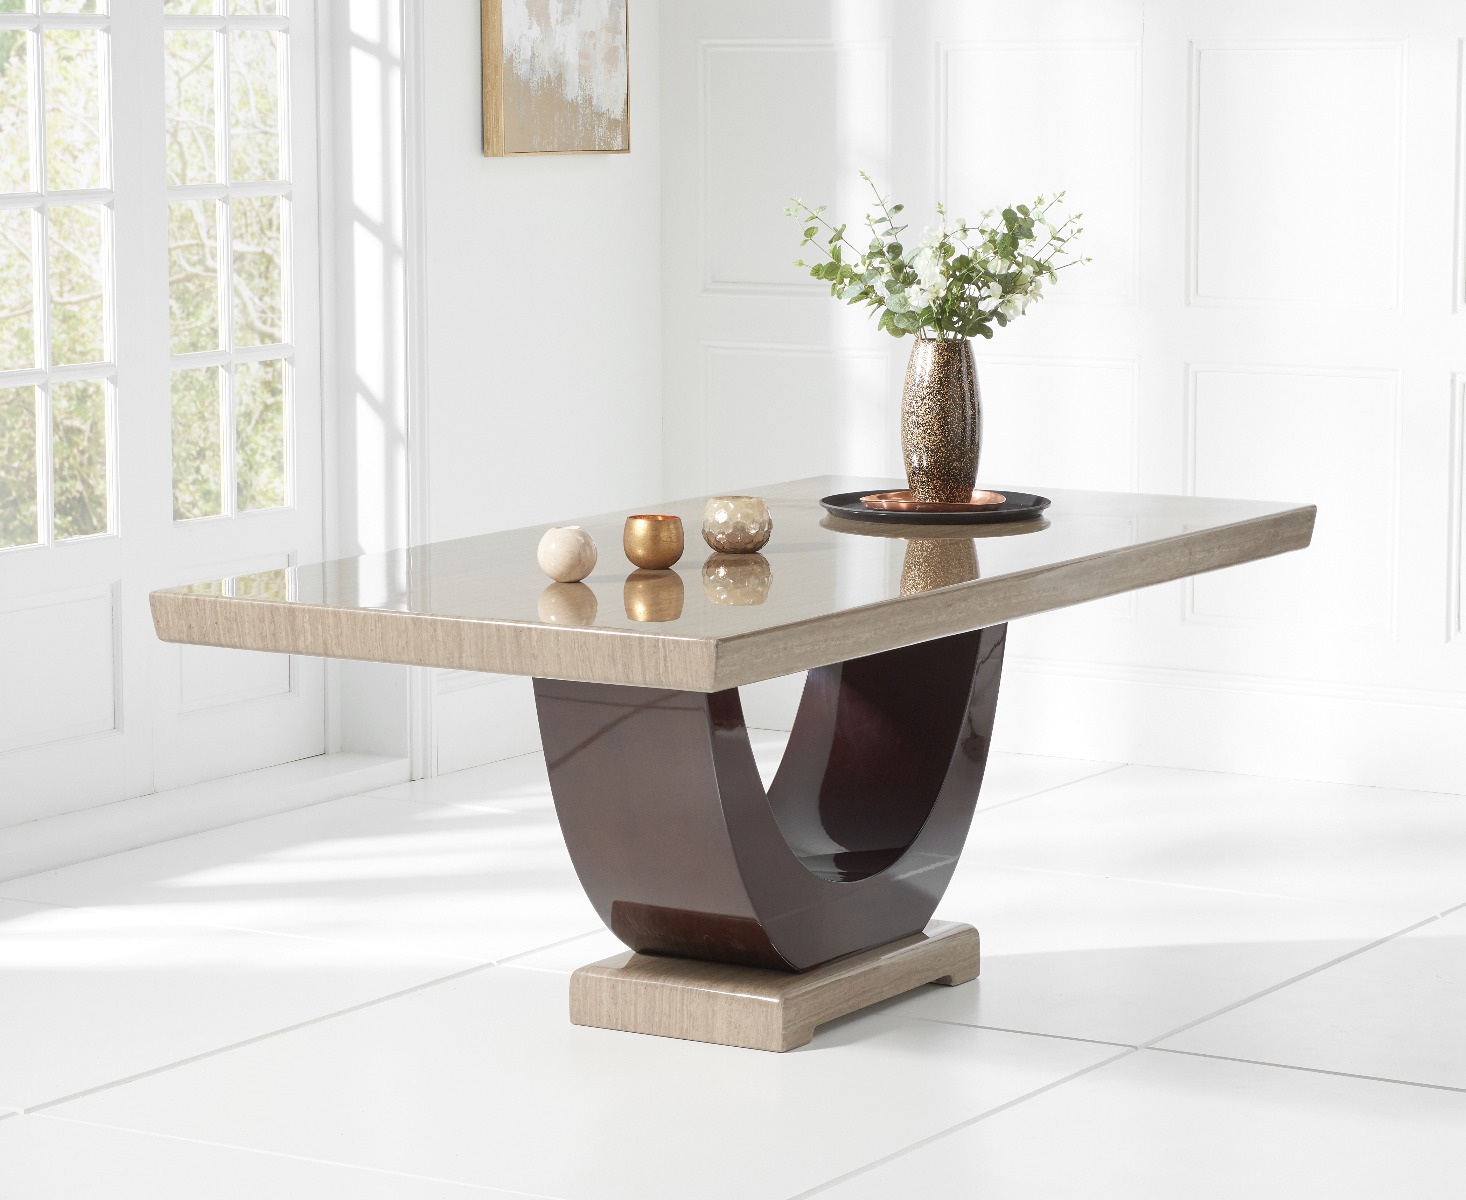 Photo 2 of Novara 200cm brown pedestal marble dining table with 8 brown alpine chairs